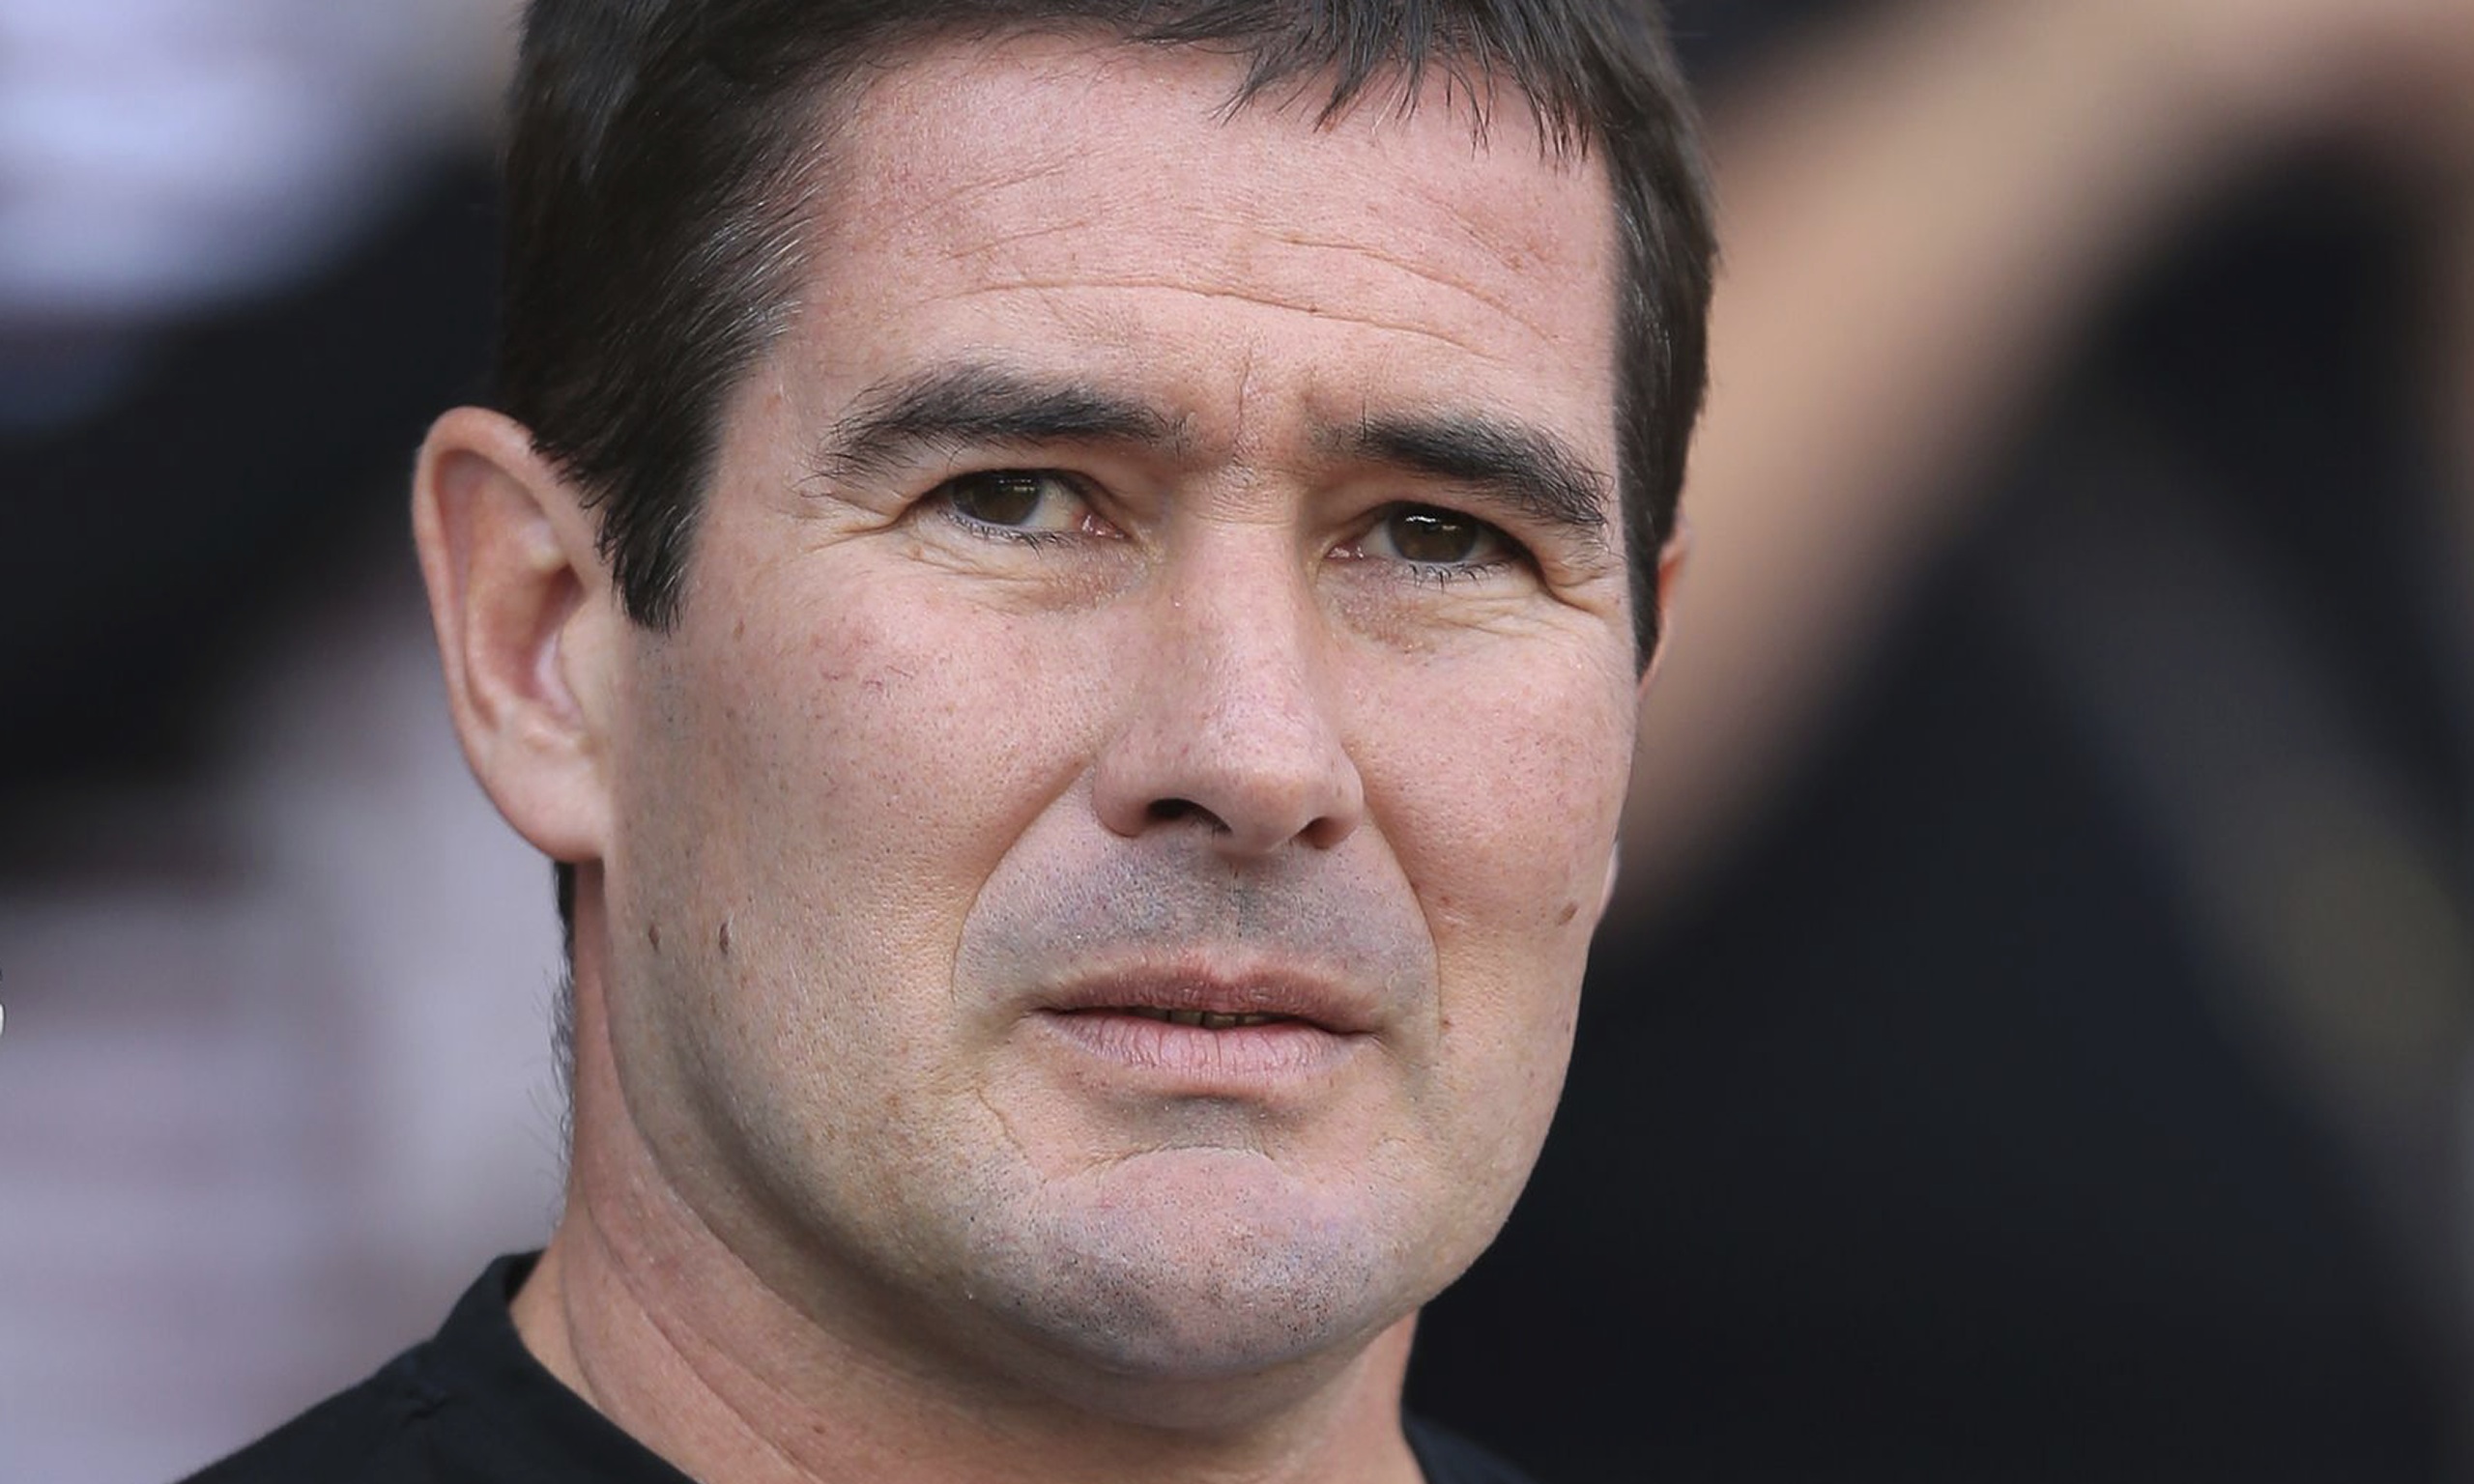 Sheffield United appoint Nigel Clough as new manager at Bramall Lane | Football | The Guardian - Nigel-Clough-009